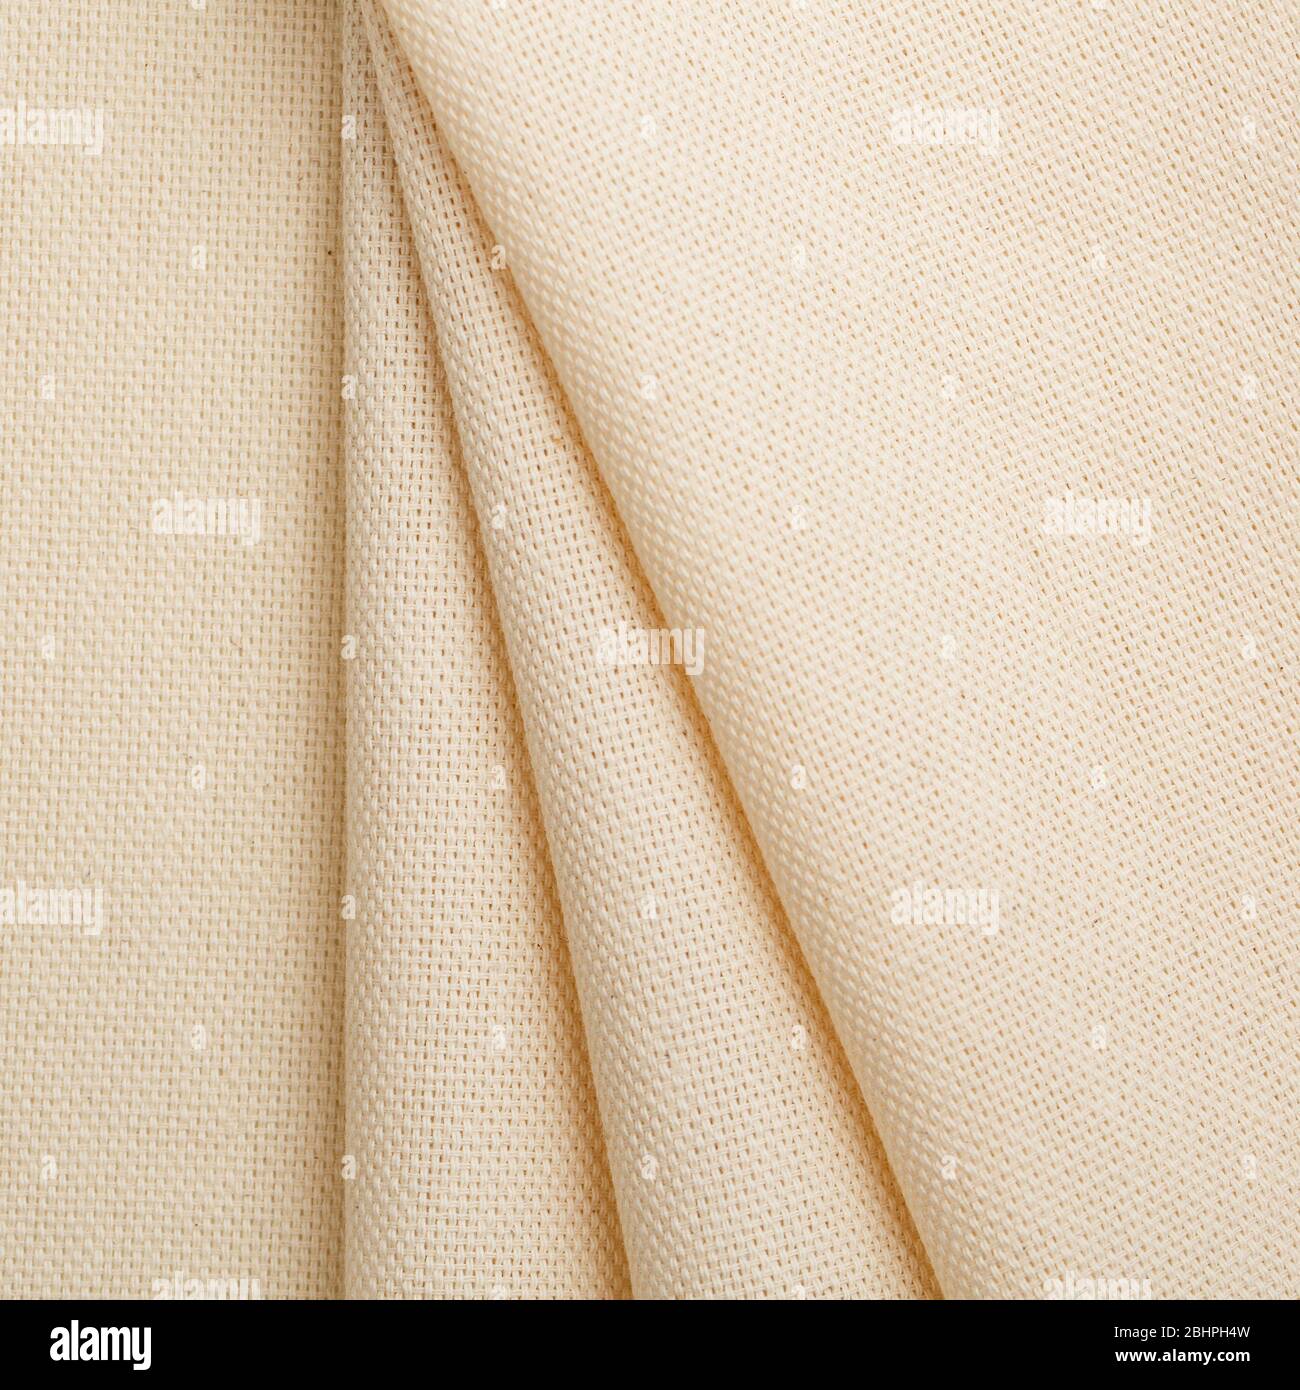 Cotton fabric in light yellow color for arts painting backdrop, sacking and bagging design Stock Photo